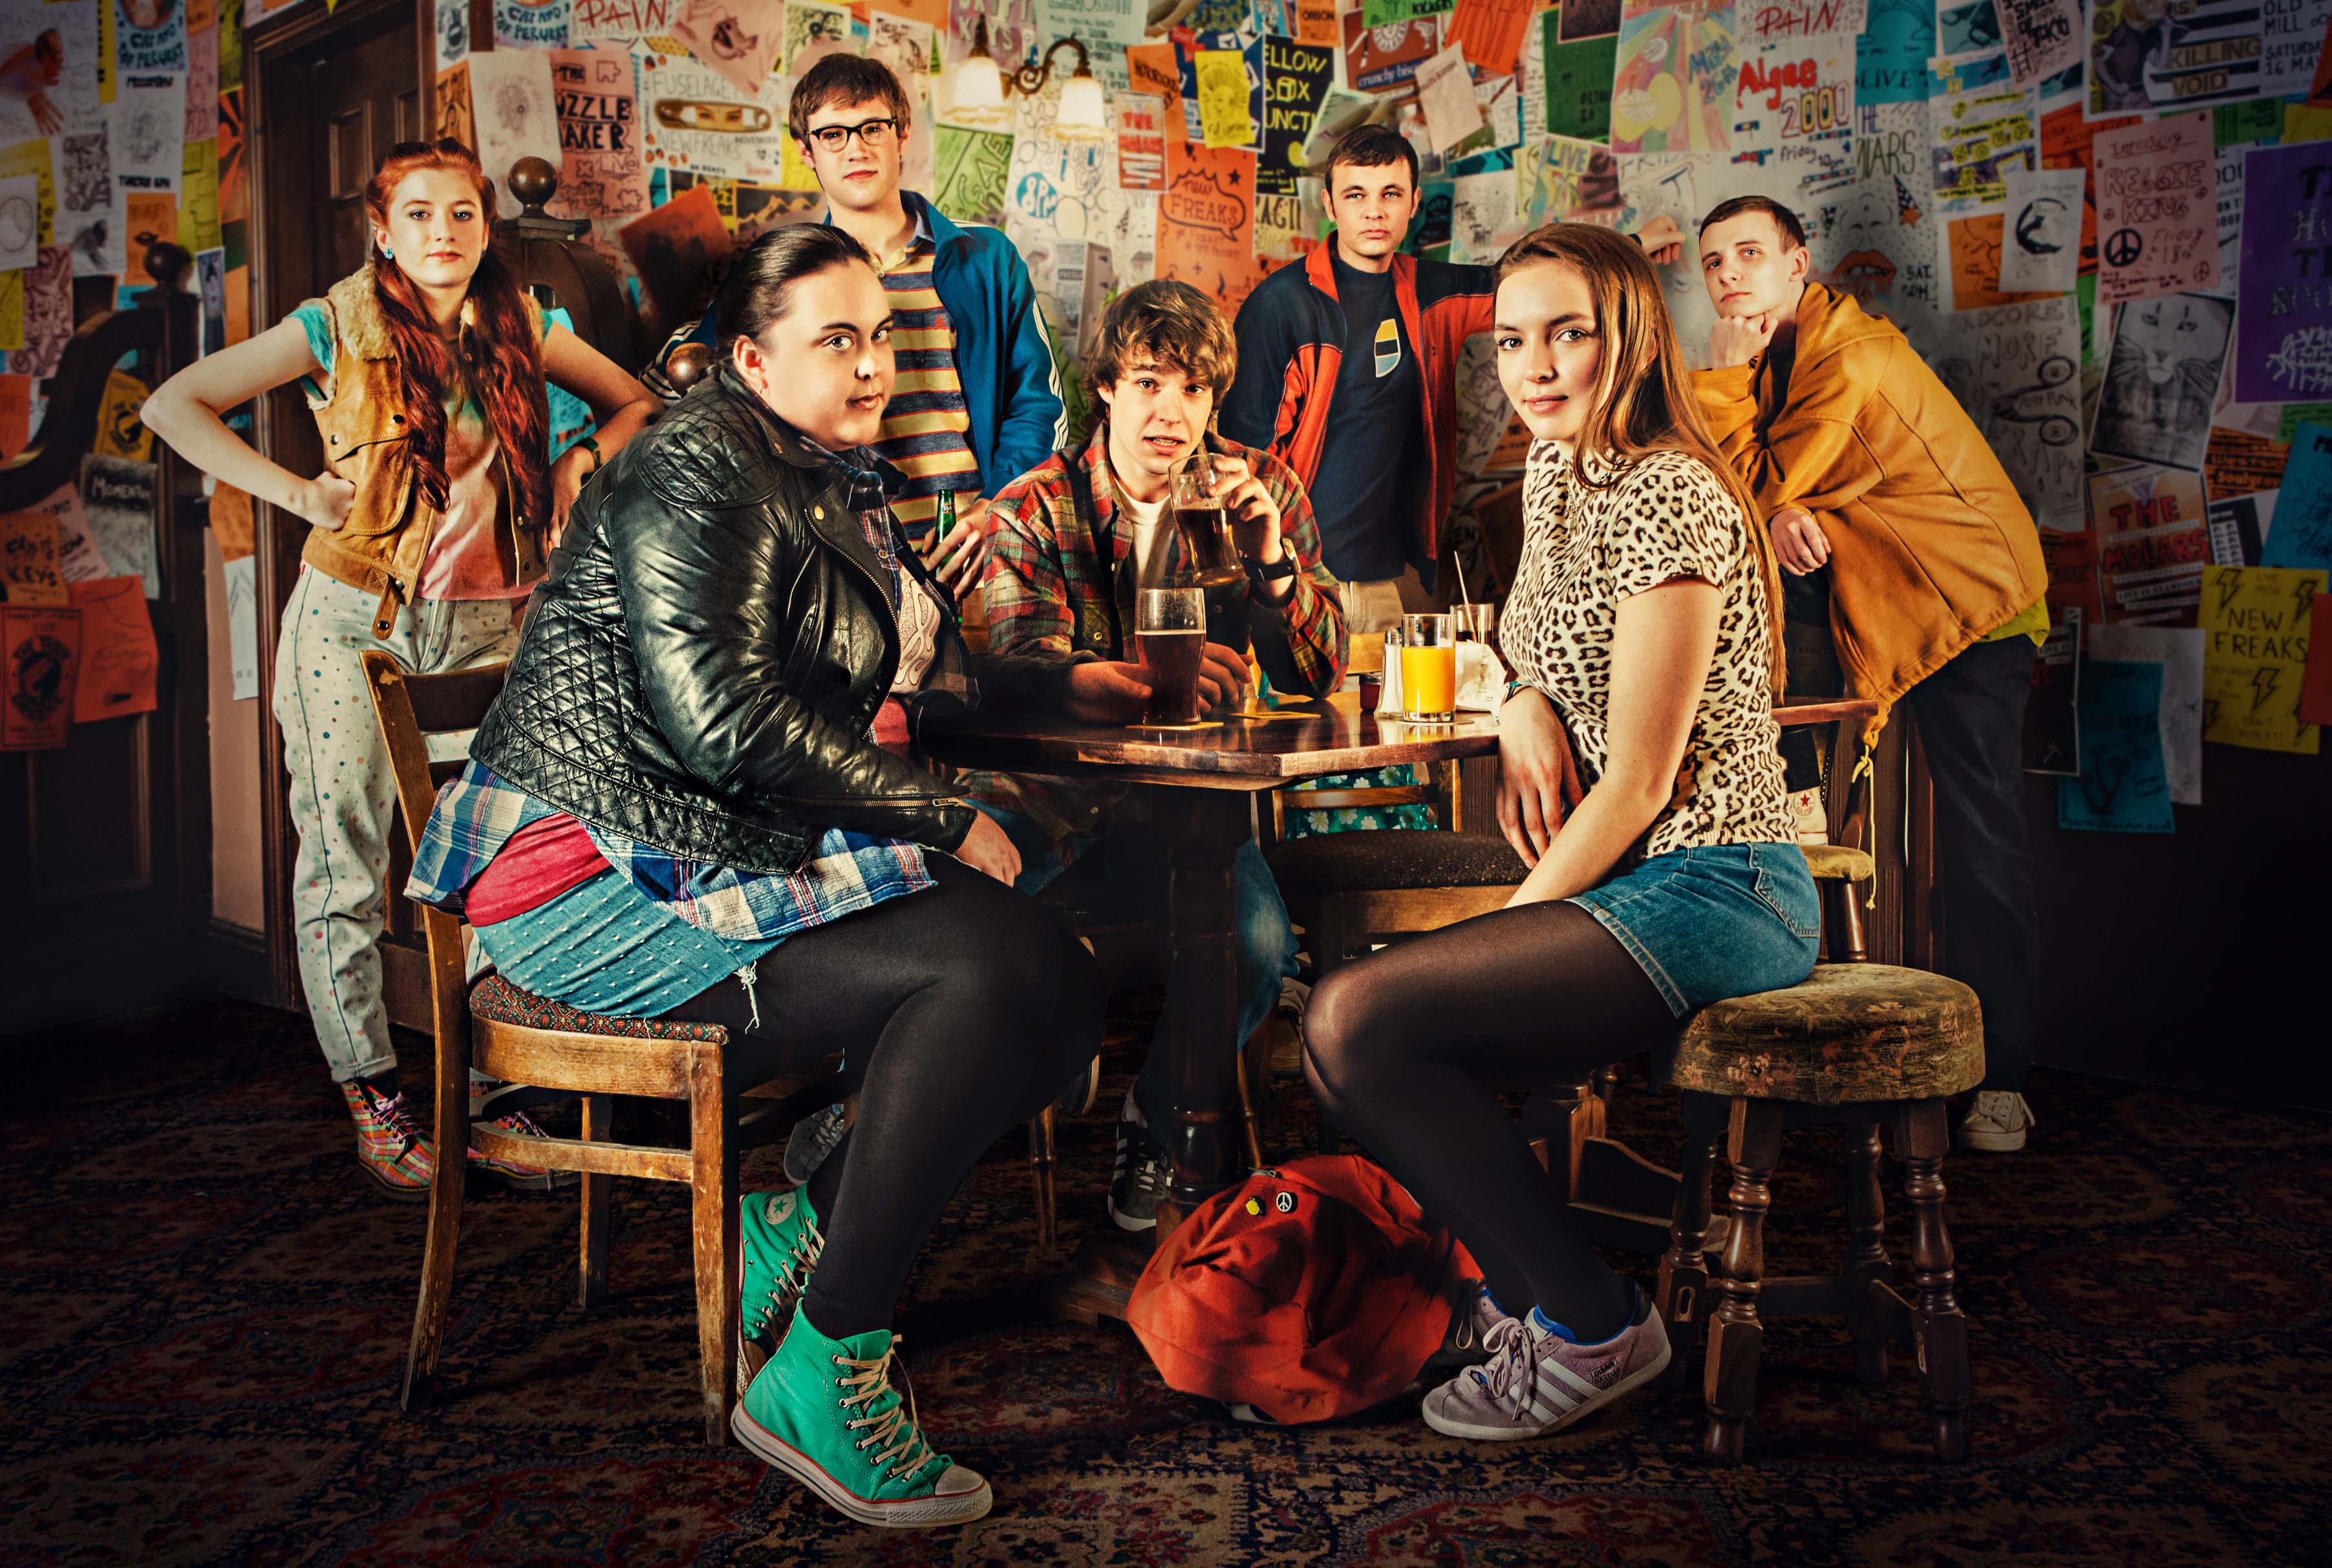 My Mad Fat Diary: Series 3